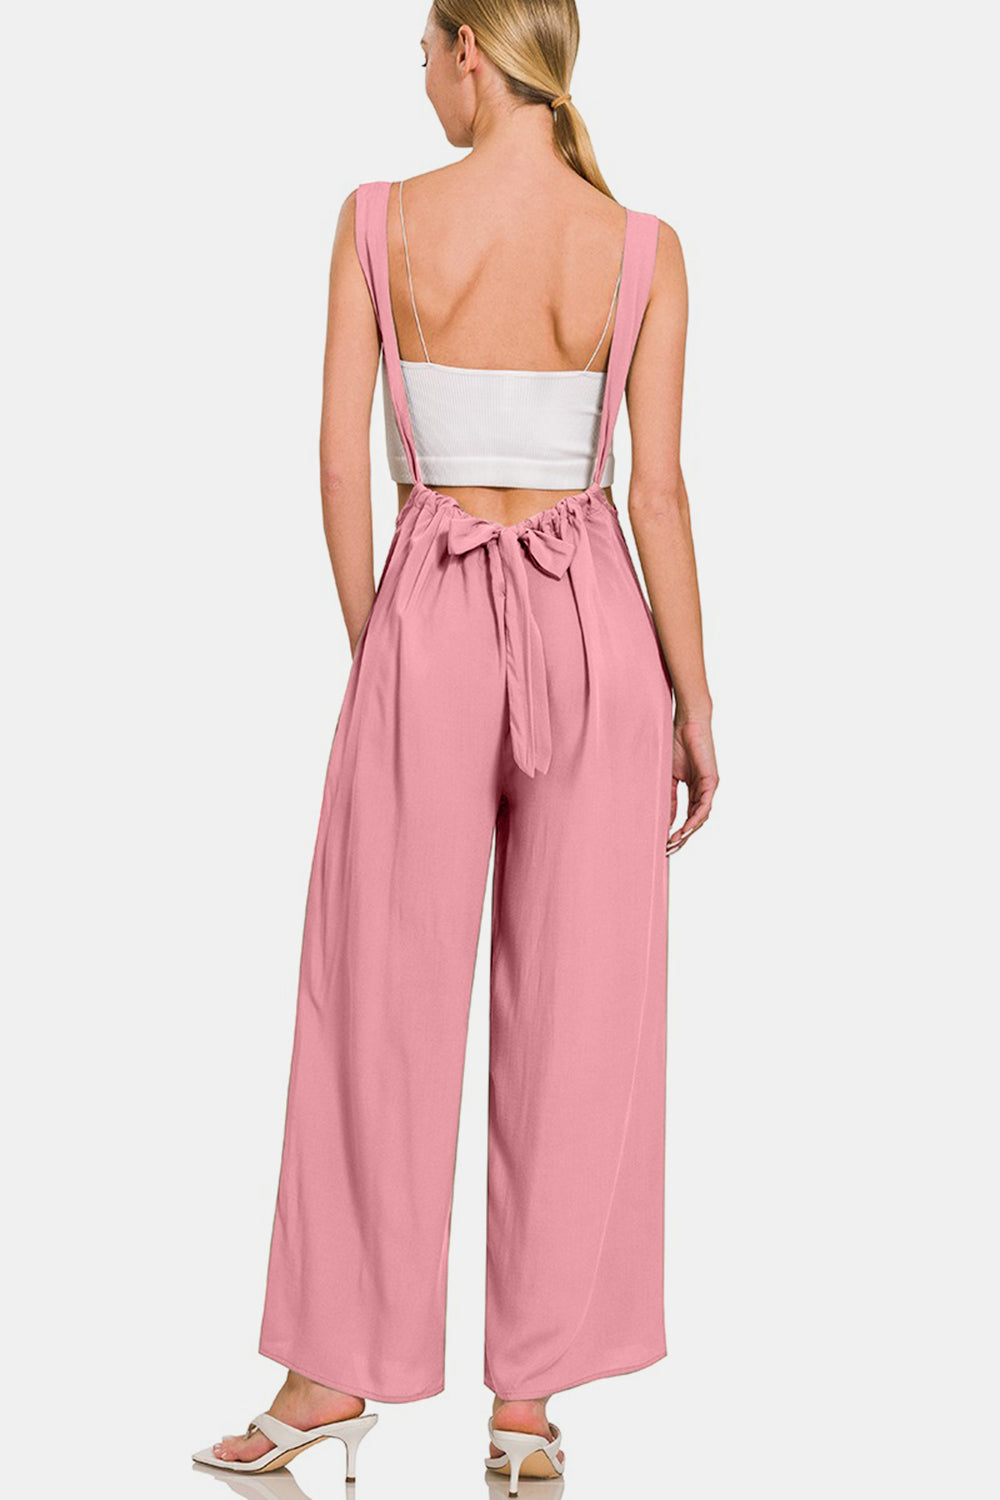 Zenana Pocketed Wide Strap Wide Leg Overalls Sunset and Swim   